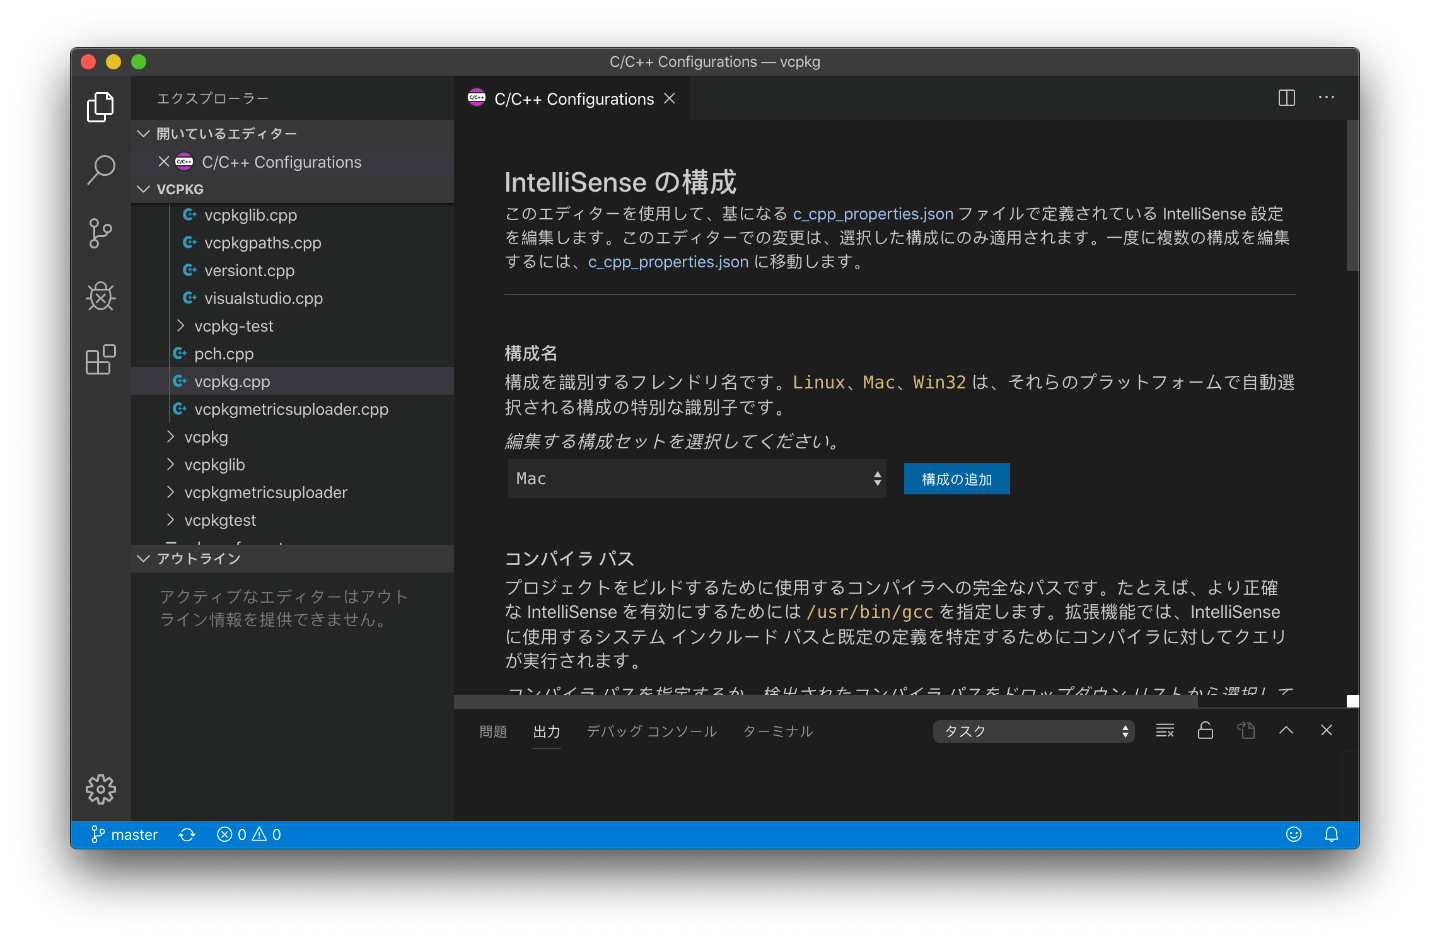 Visual Studio Code with UI elements in Japanese